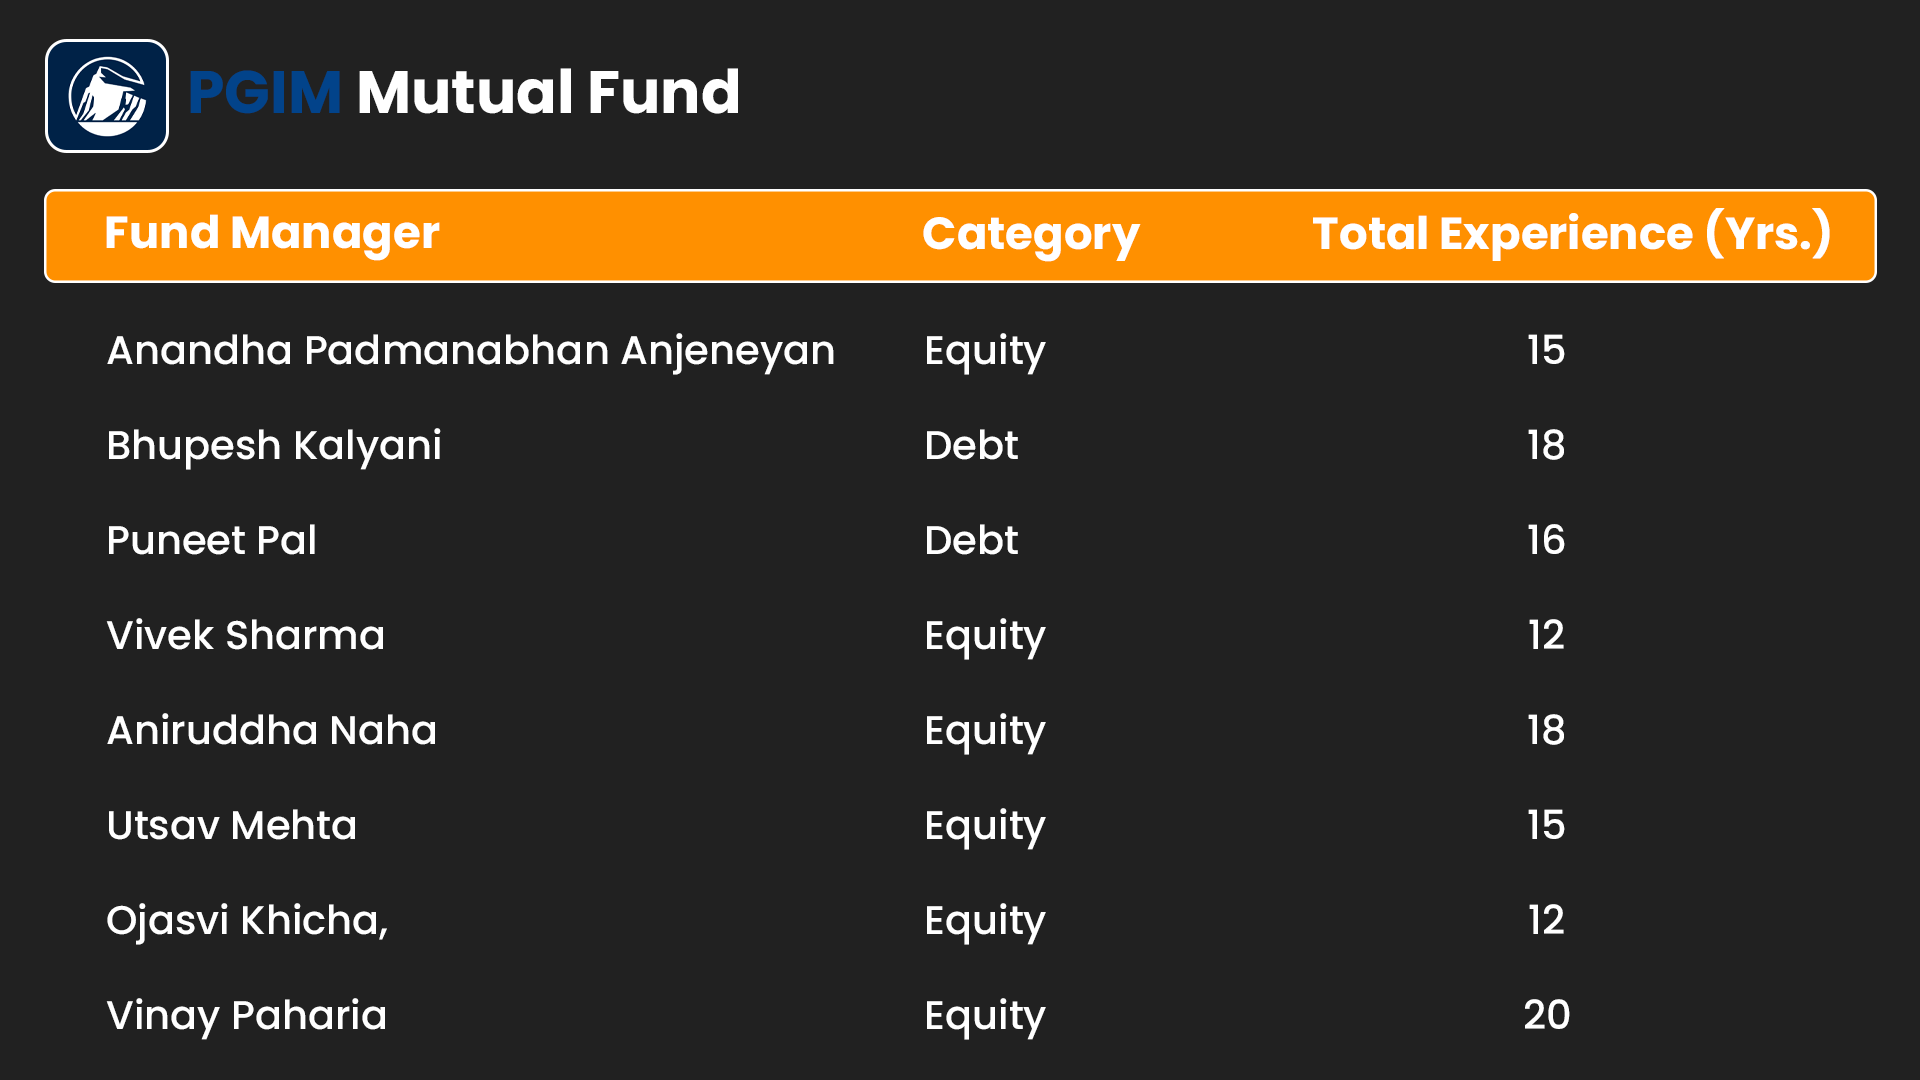 List of all Fund Managers PGIM Mutual funds